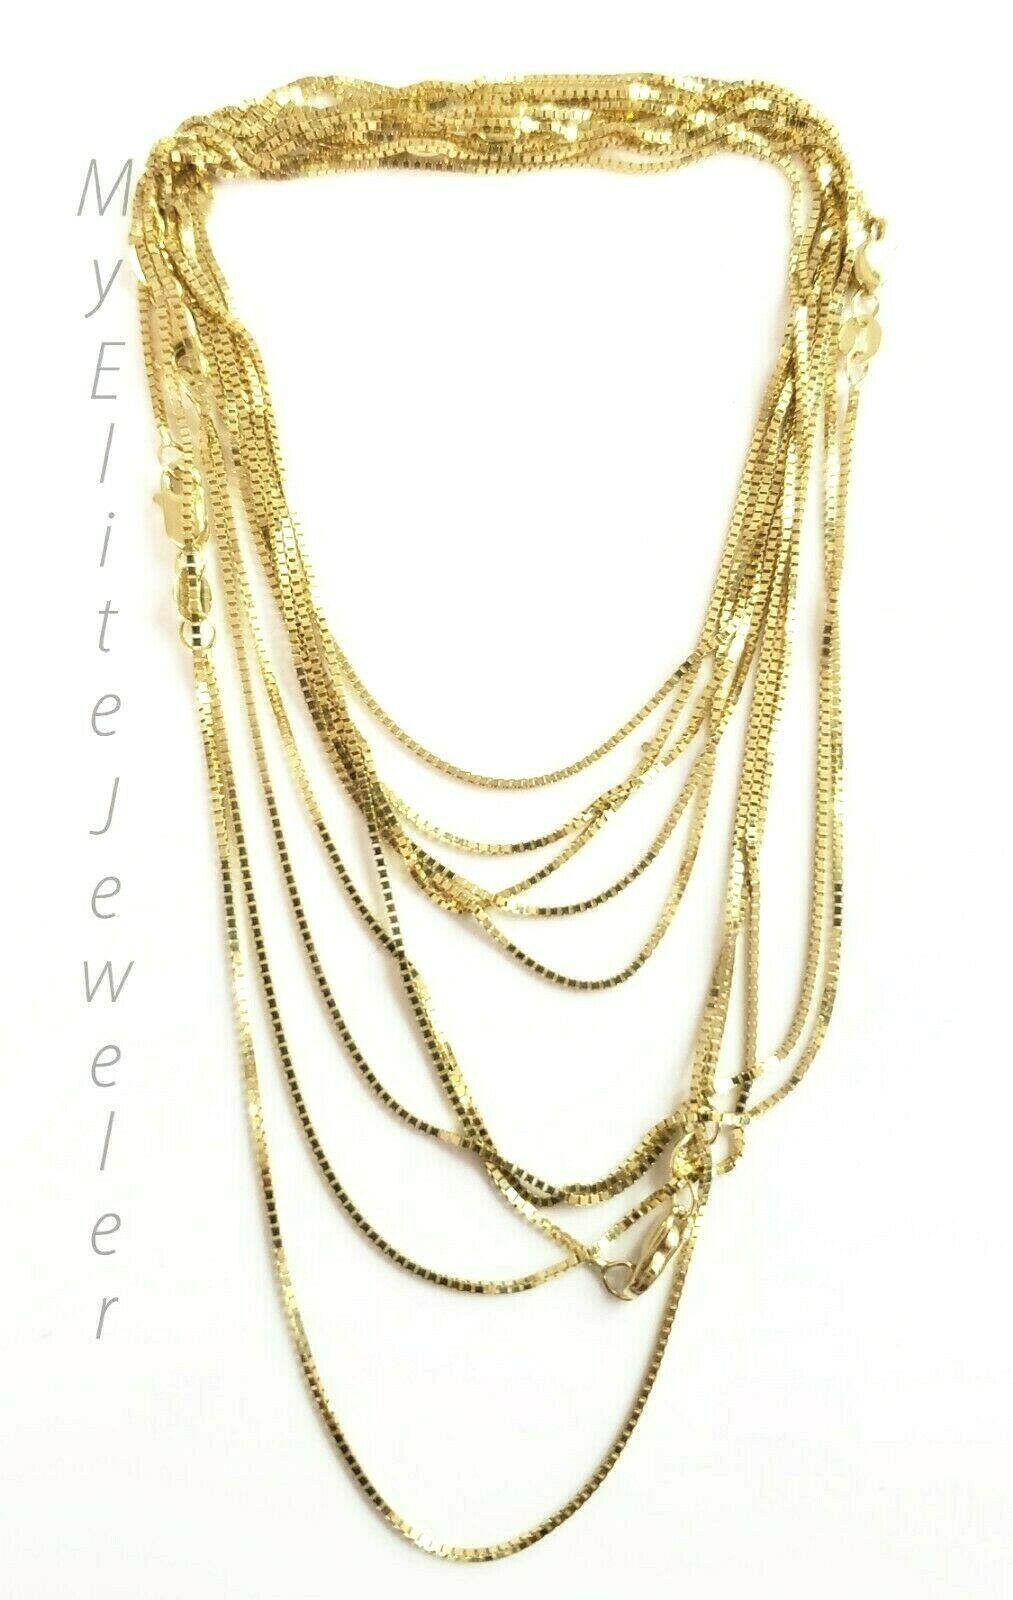 Solid 10K Yellow Gold Chain 16" 18" 20 Inch Ladies Necklace PERFECT FOR PENDANT